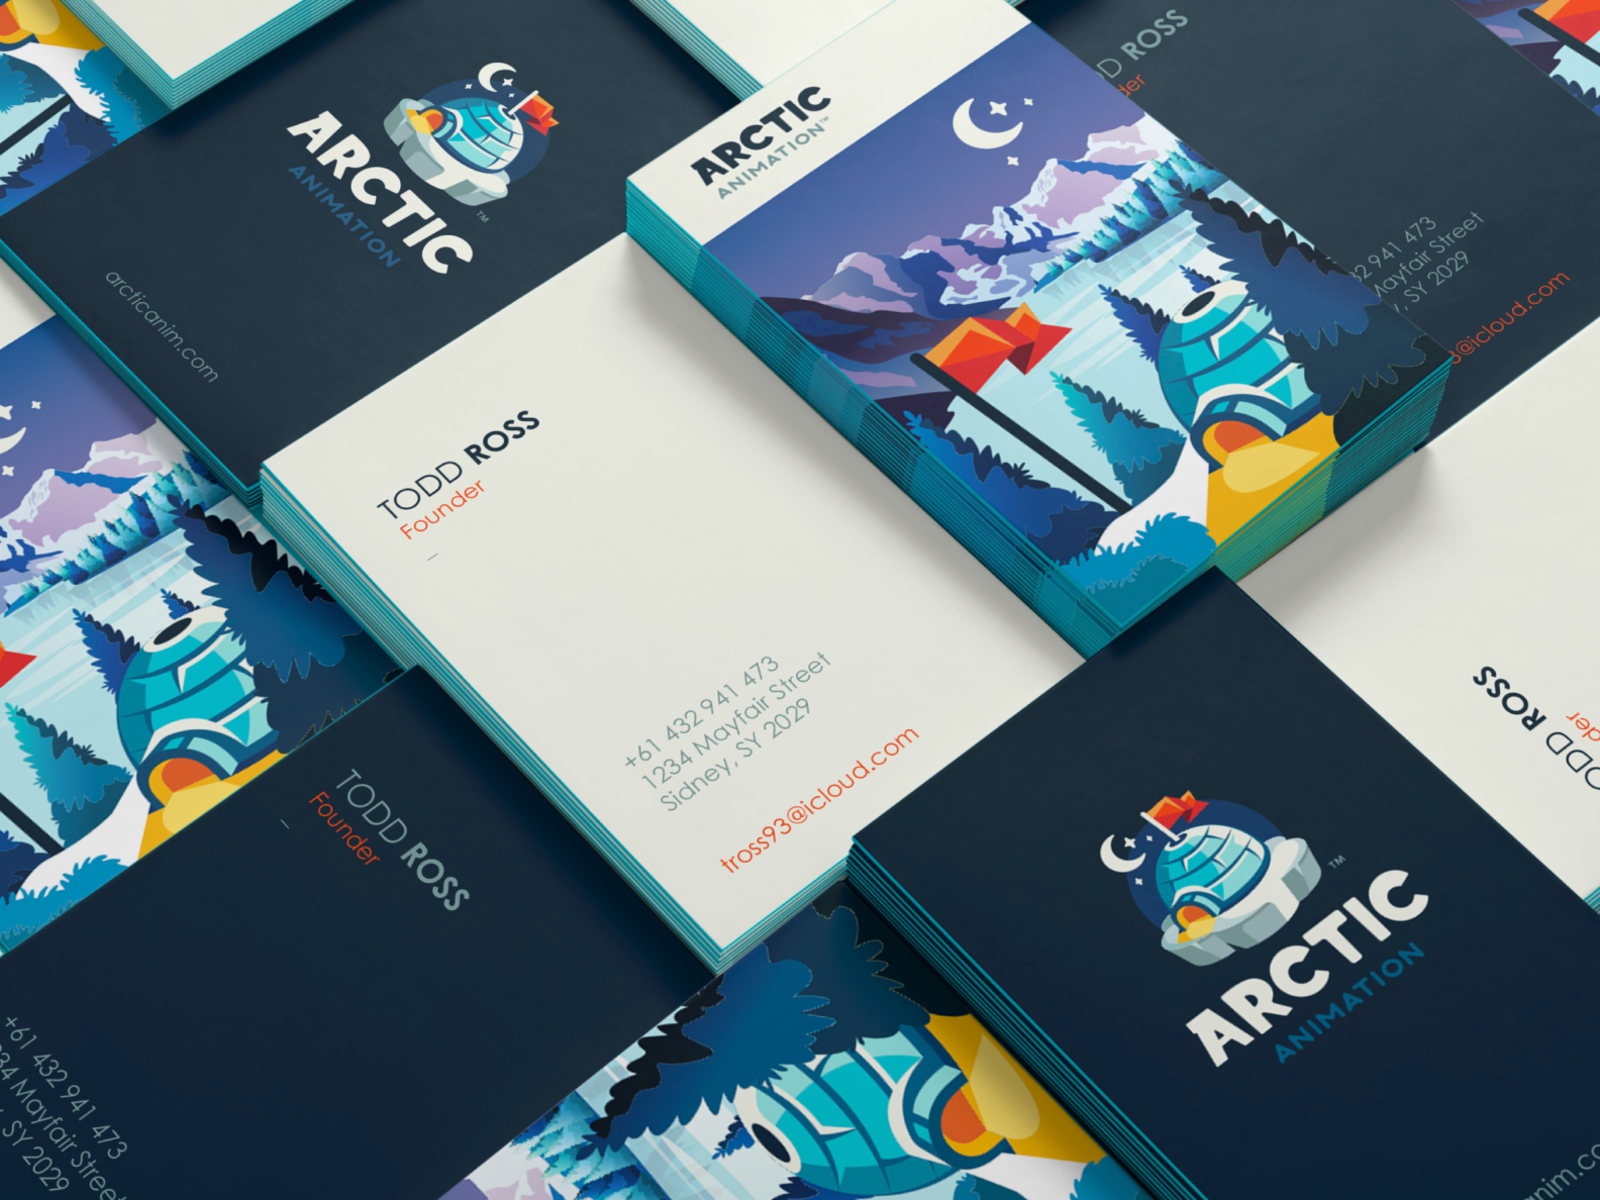 Download Arctic Animation Business Card By Milos Djuric Djuksico On Dribbble